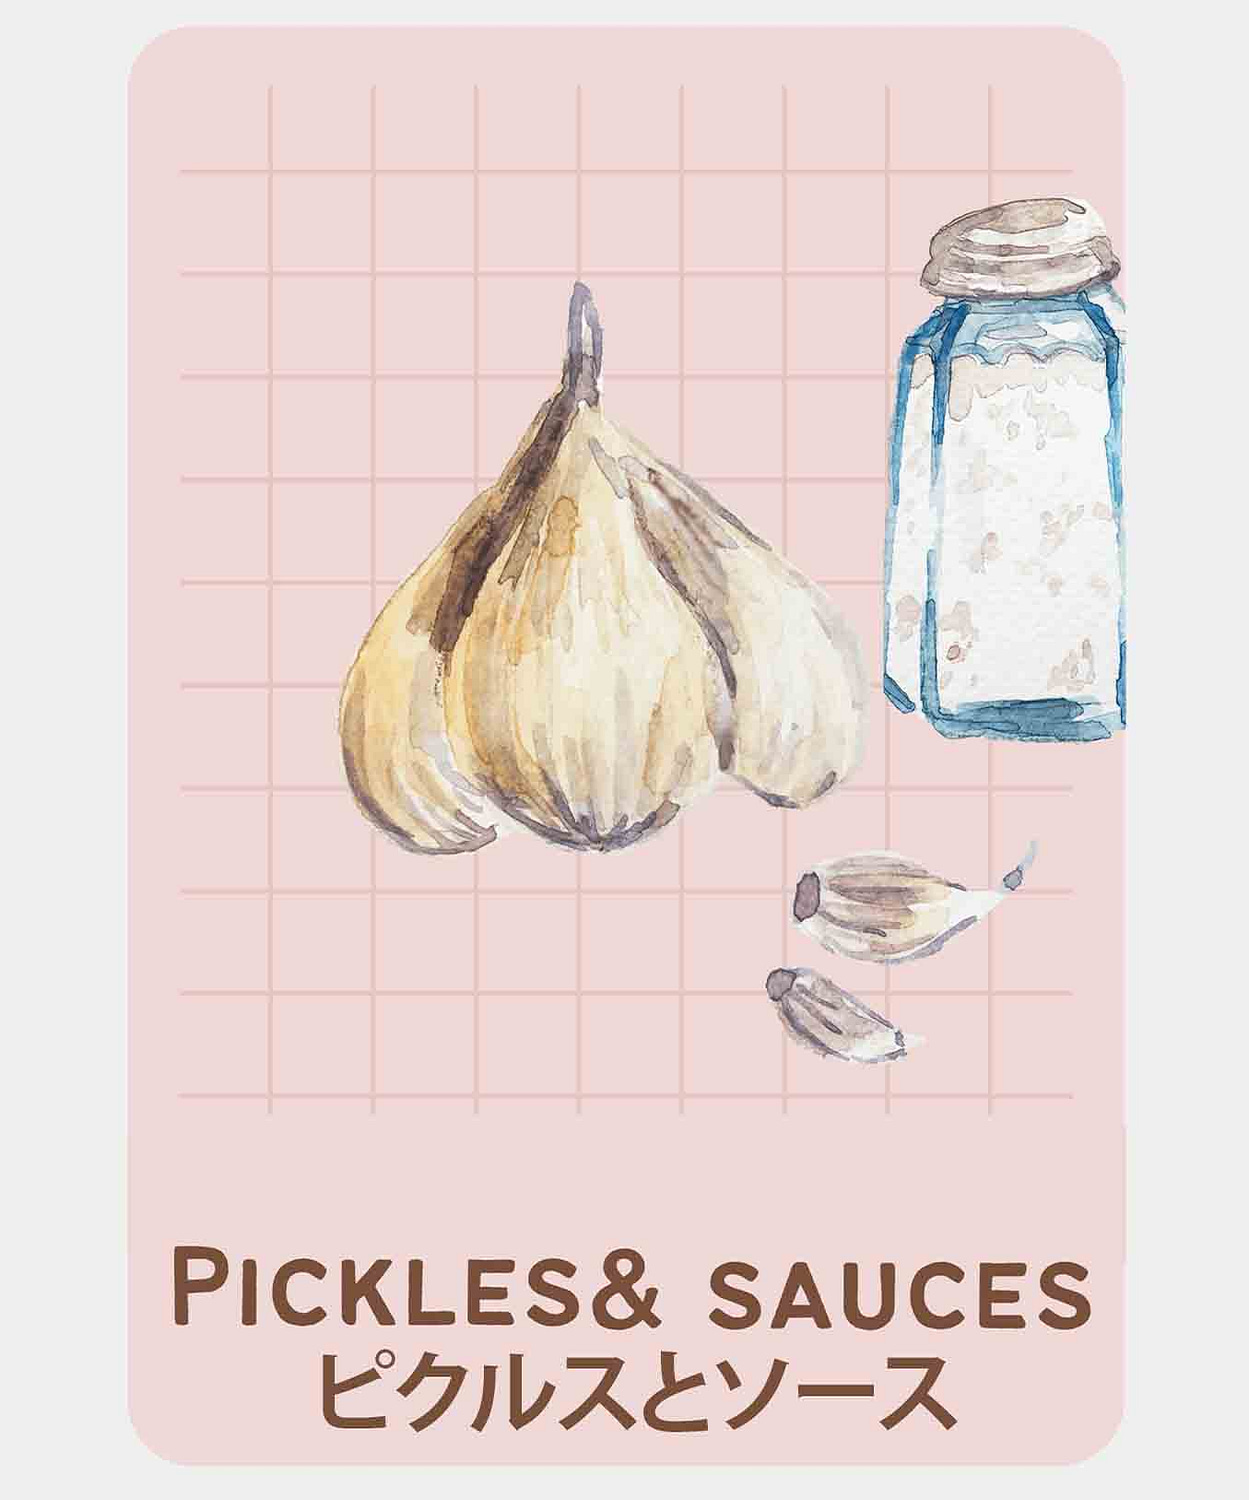 buy pickles and sauces online